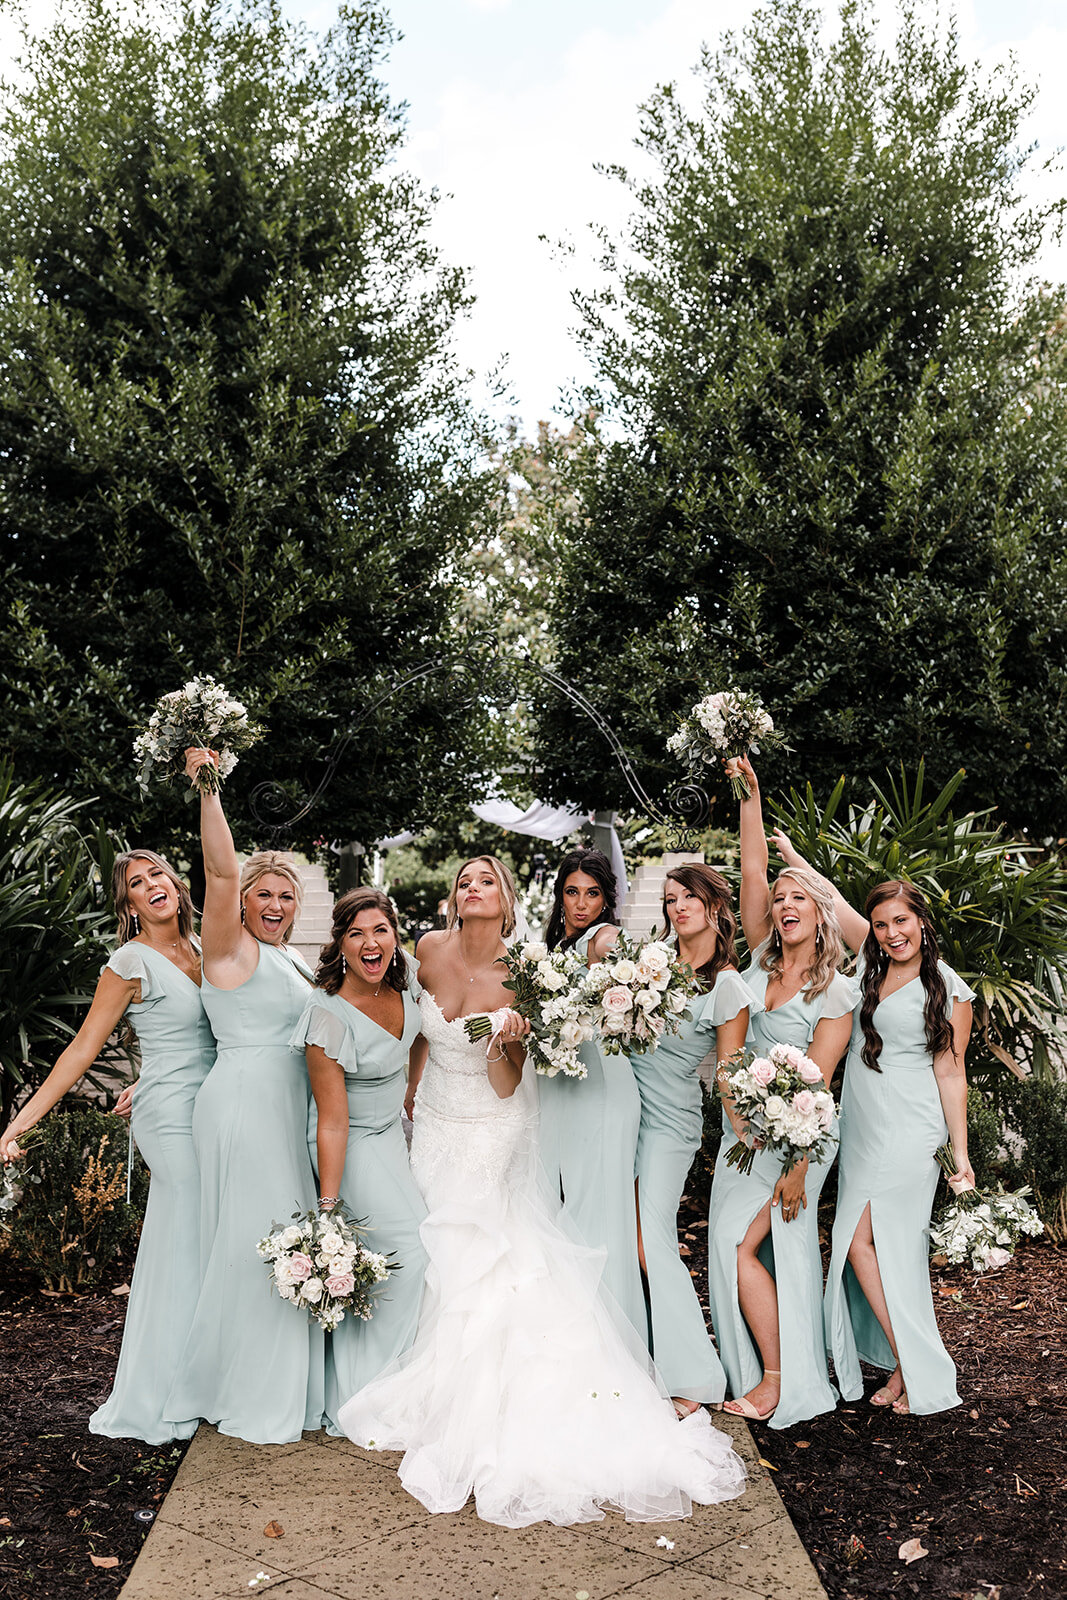 ivory-and-bride-down-for-the-gown-cassie-real-bride-wedding-dress-maggie-sottero-blog-bridal-blog-wedding-dress-mermaid-bridal-gown-wedding-gown-bridal-shop-bridal-boutique-bridal-shopping-bridal-style-savannah-georgia-GMP504-153-2.jpg